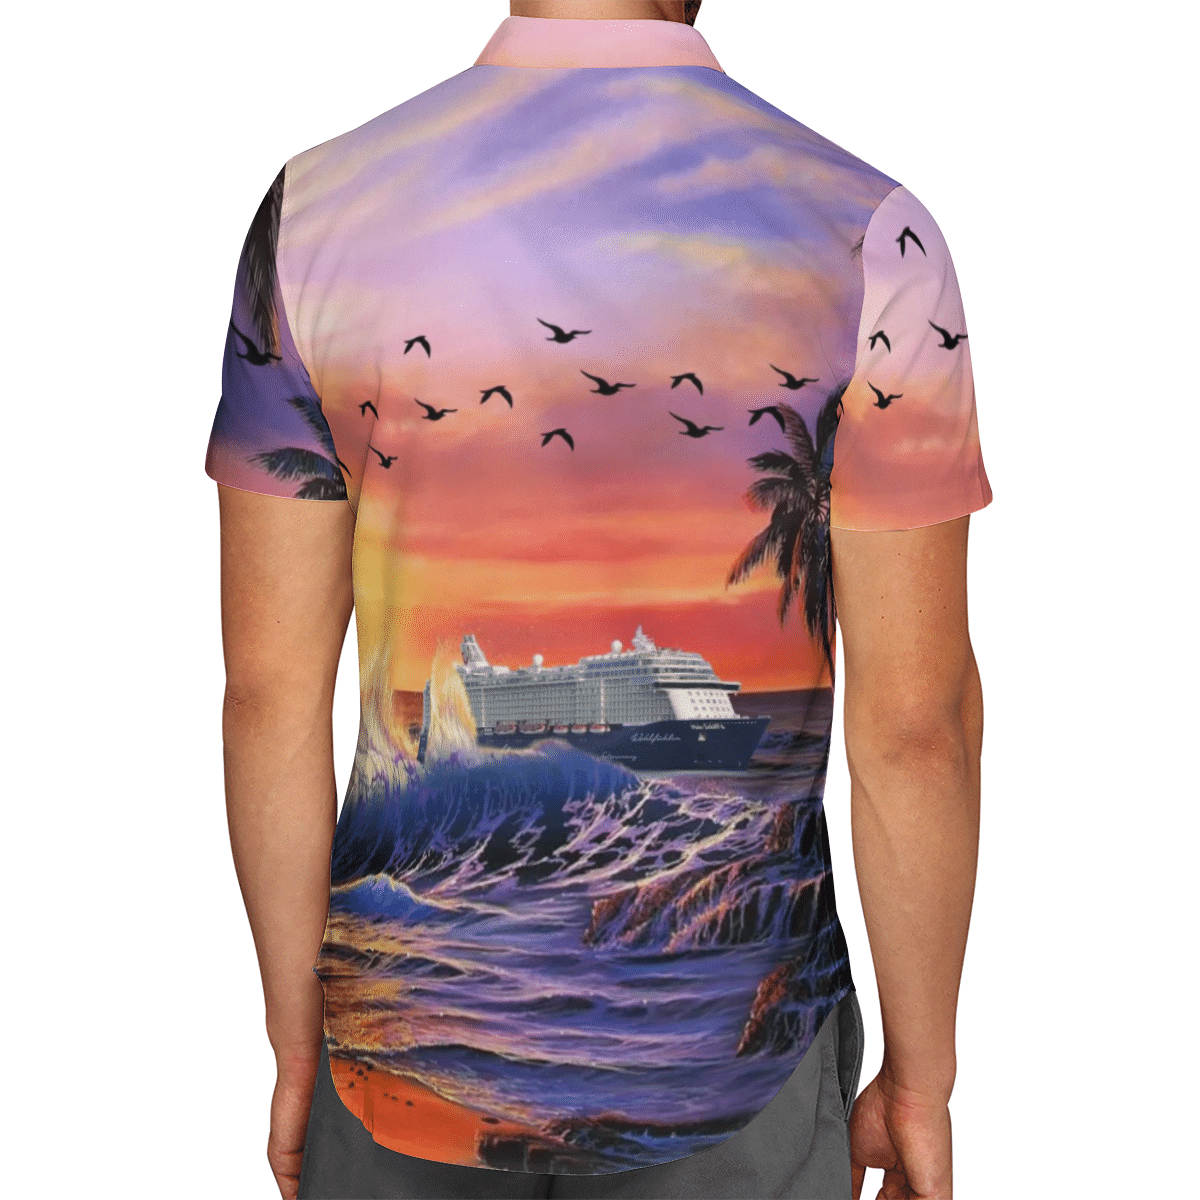 Going to the beach with a quality shirt 199